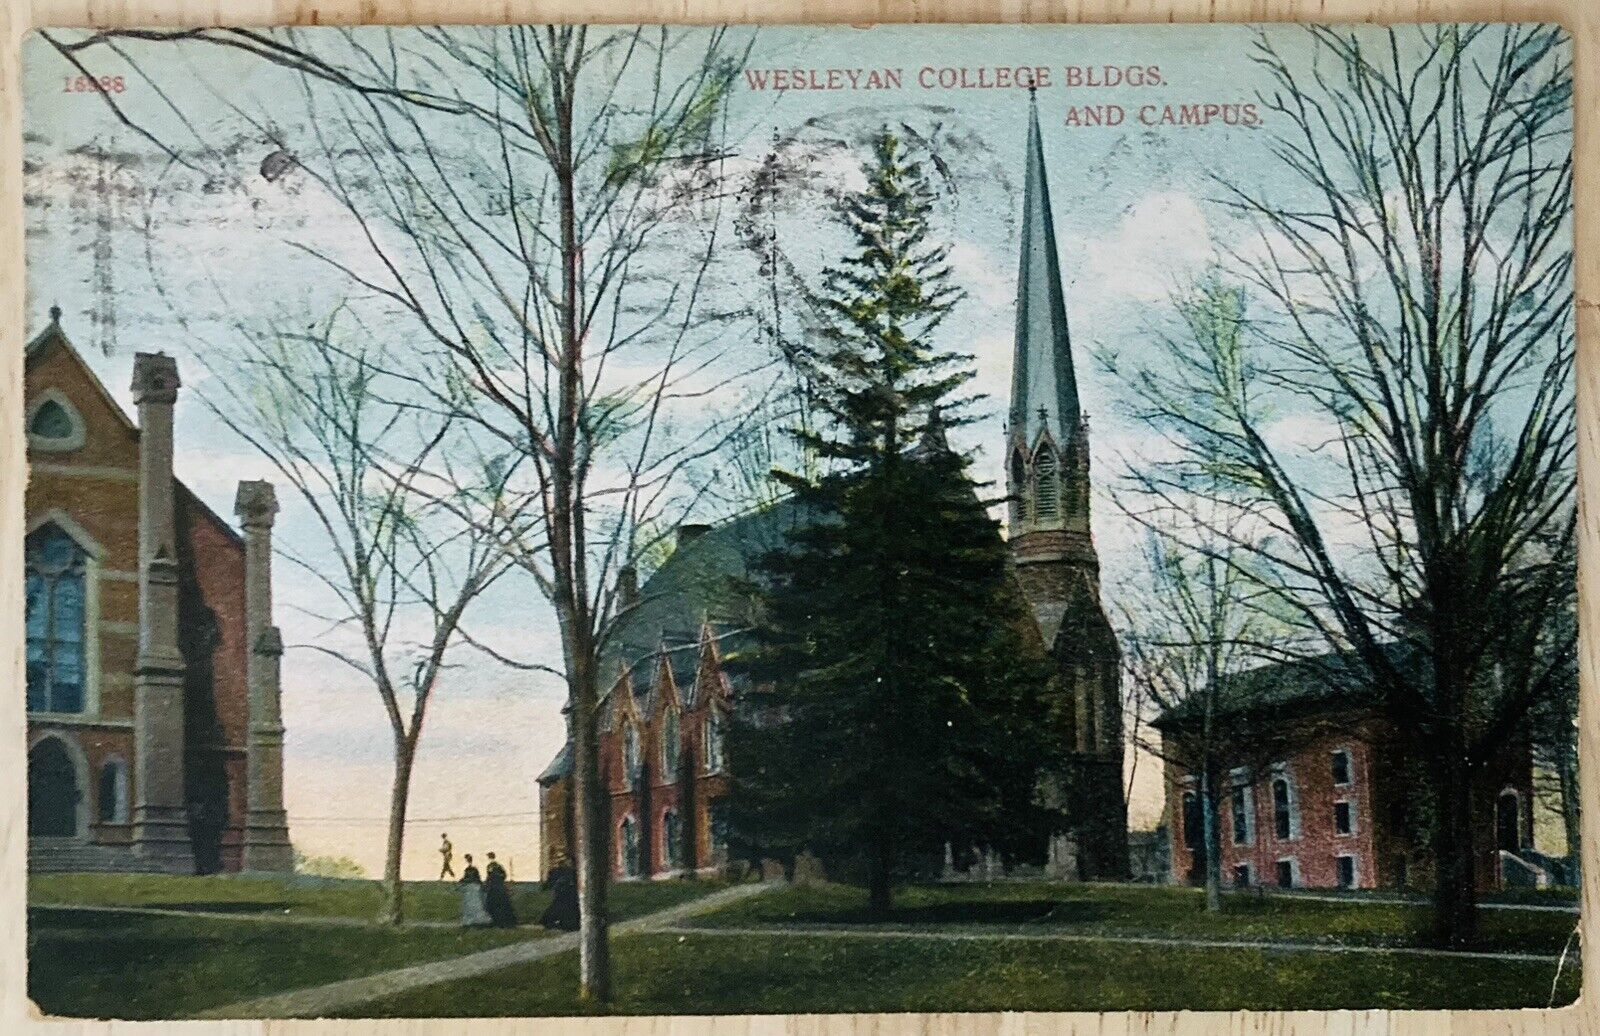 MIDDLETOWN, CONN. C.1908 PC. (A58)~VIEW OF WESLEYAN COLLEGE CAMPUS BUILDINGS